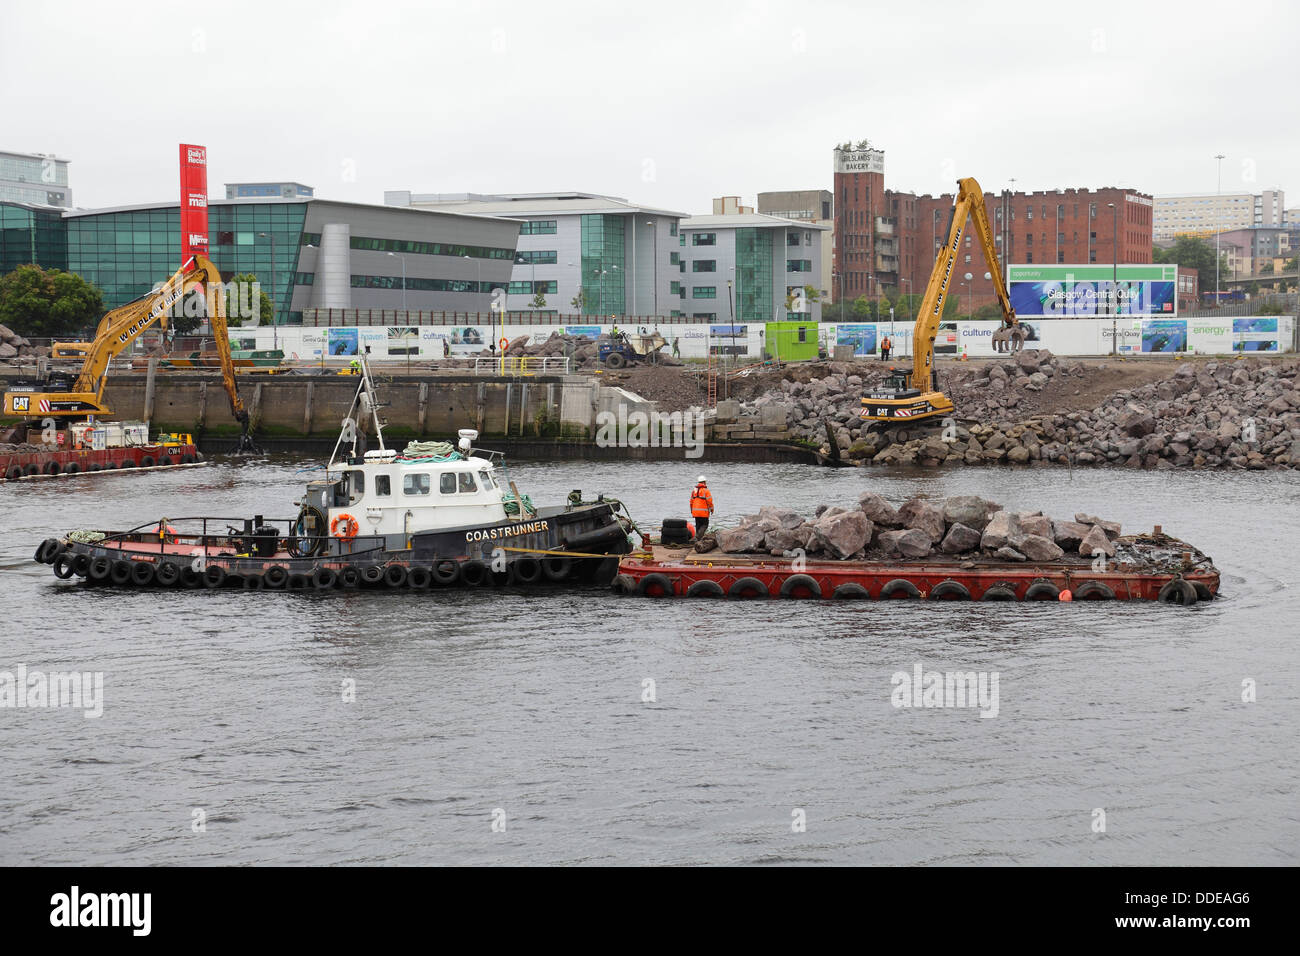 Work underway to repair the collapsed walkway at Anderston Quay on the River Clyde using a digger, tug and a barge in Glasgow, Scotland, UK Stock Photo